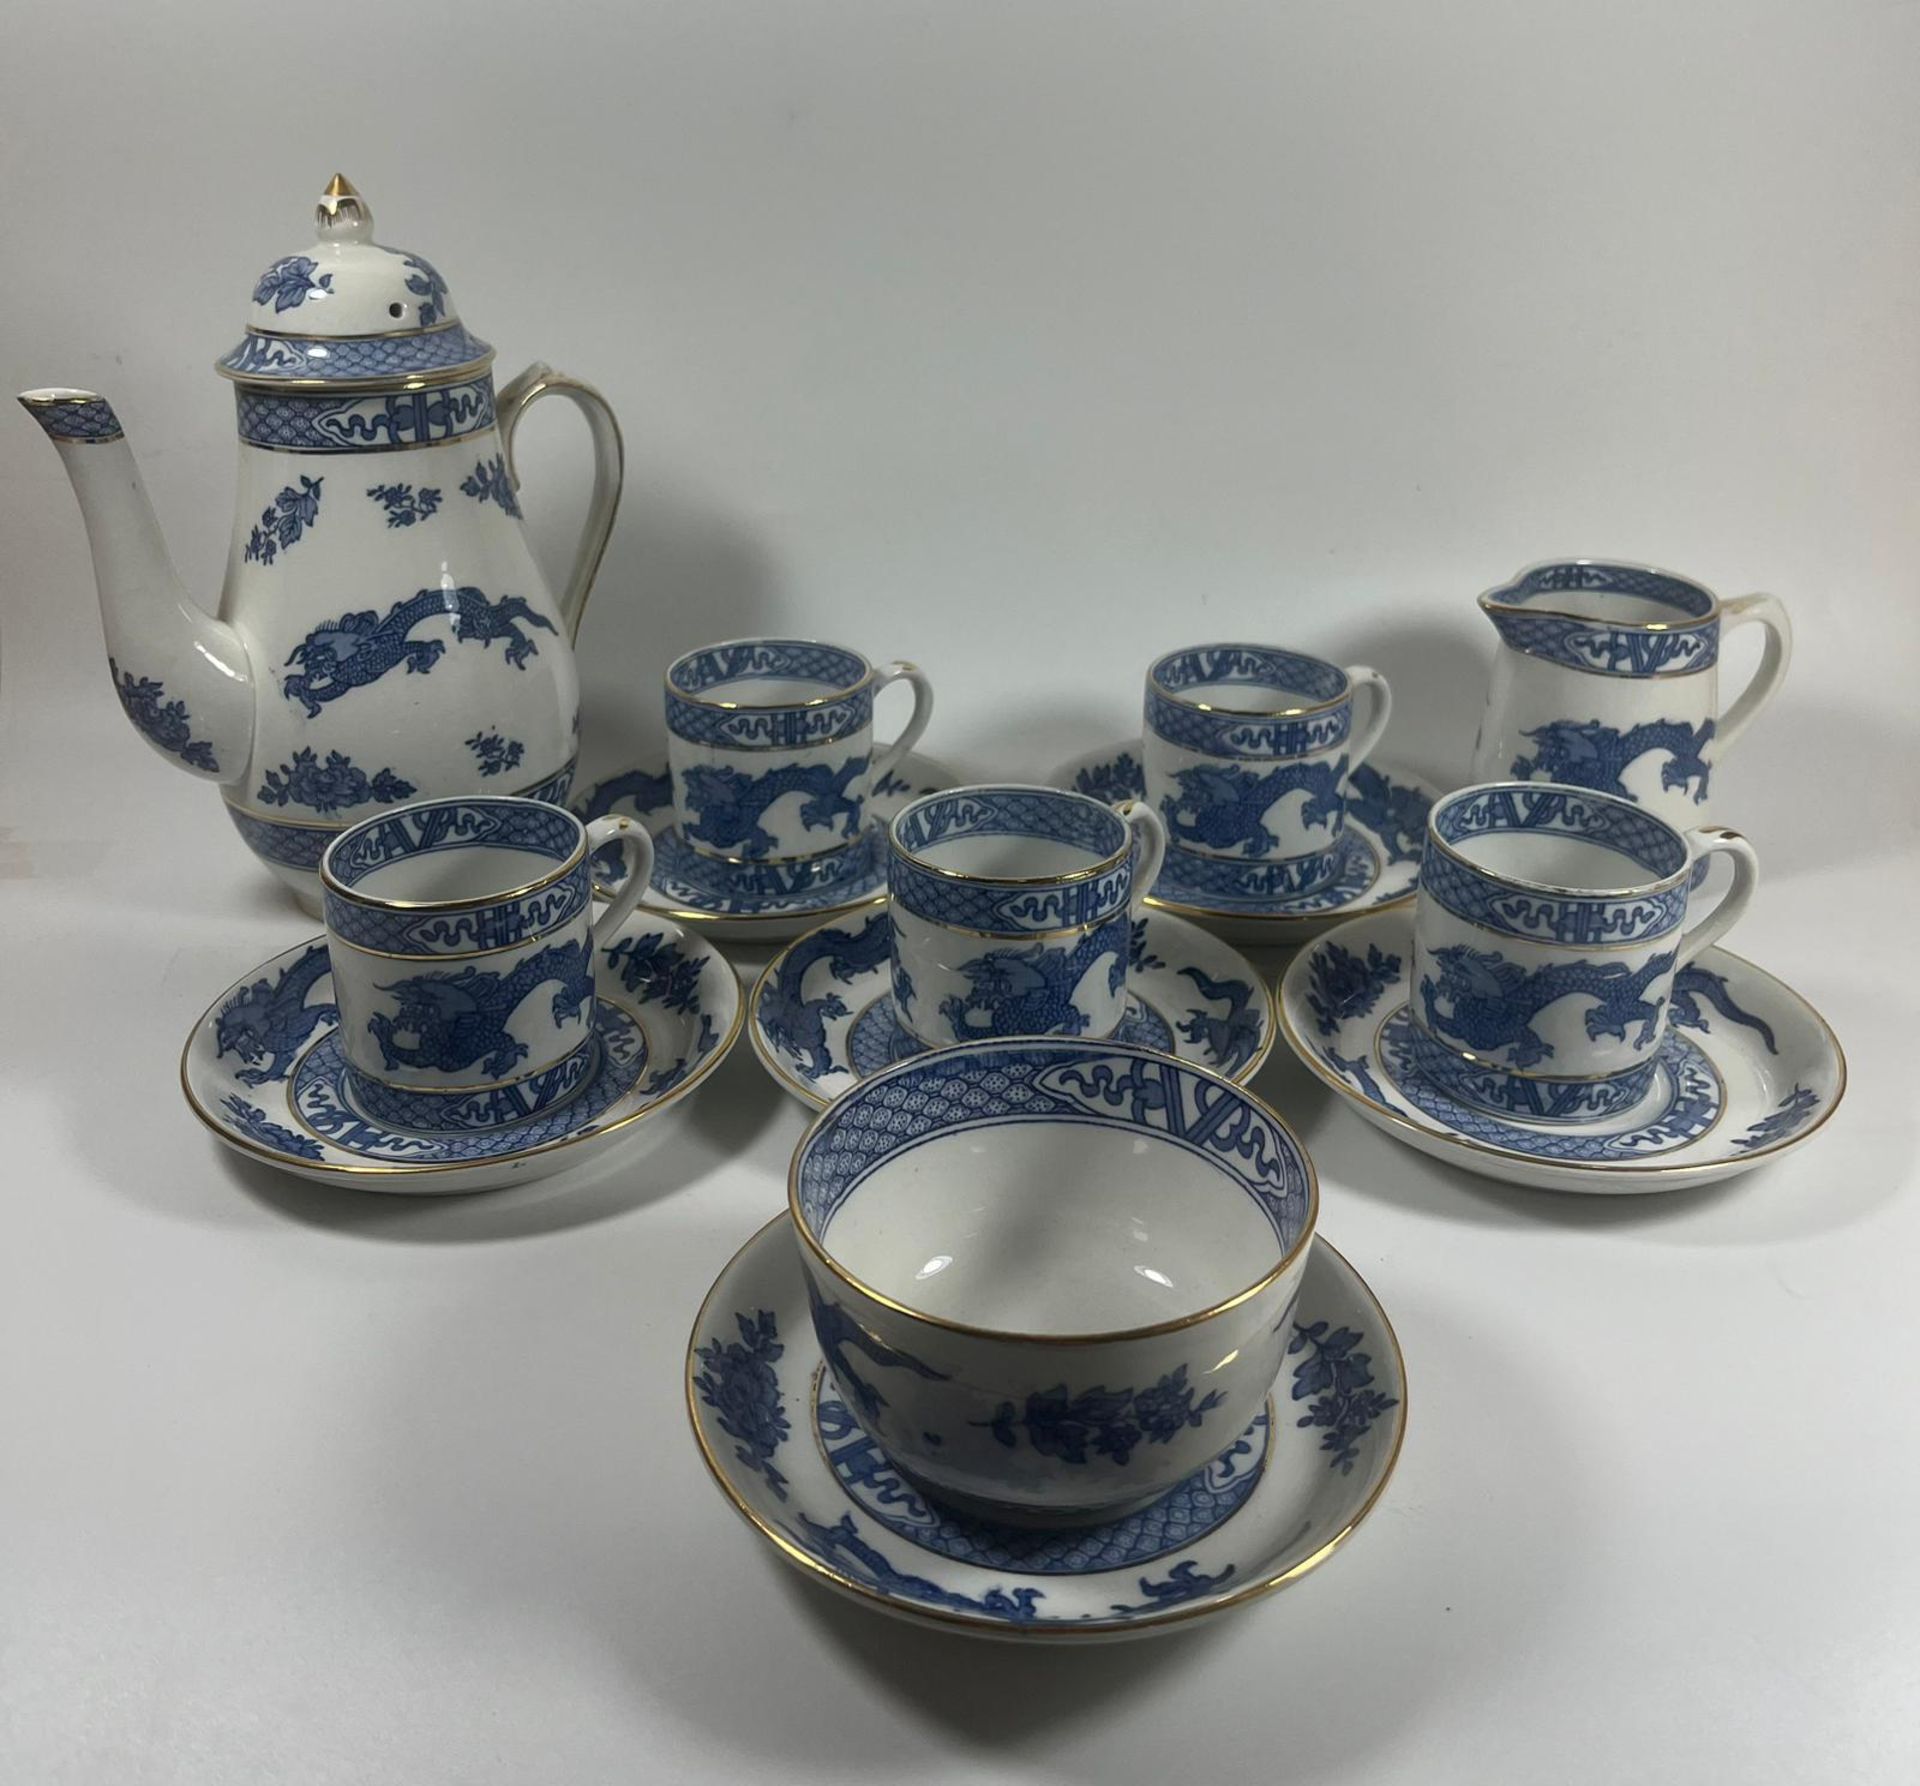 AN ART DECO 1920S BOOTHS BLUE AND WHITE DRAGON PATTERN TEA SET, TEAPOT HEIGHT 19 CM - Image 3 of 6